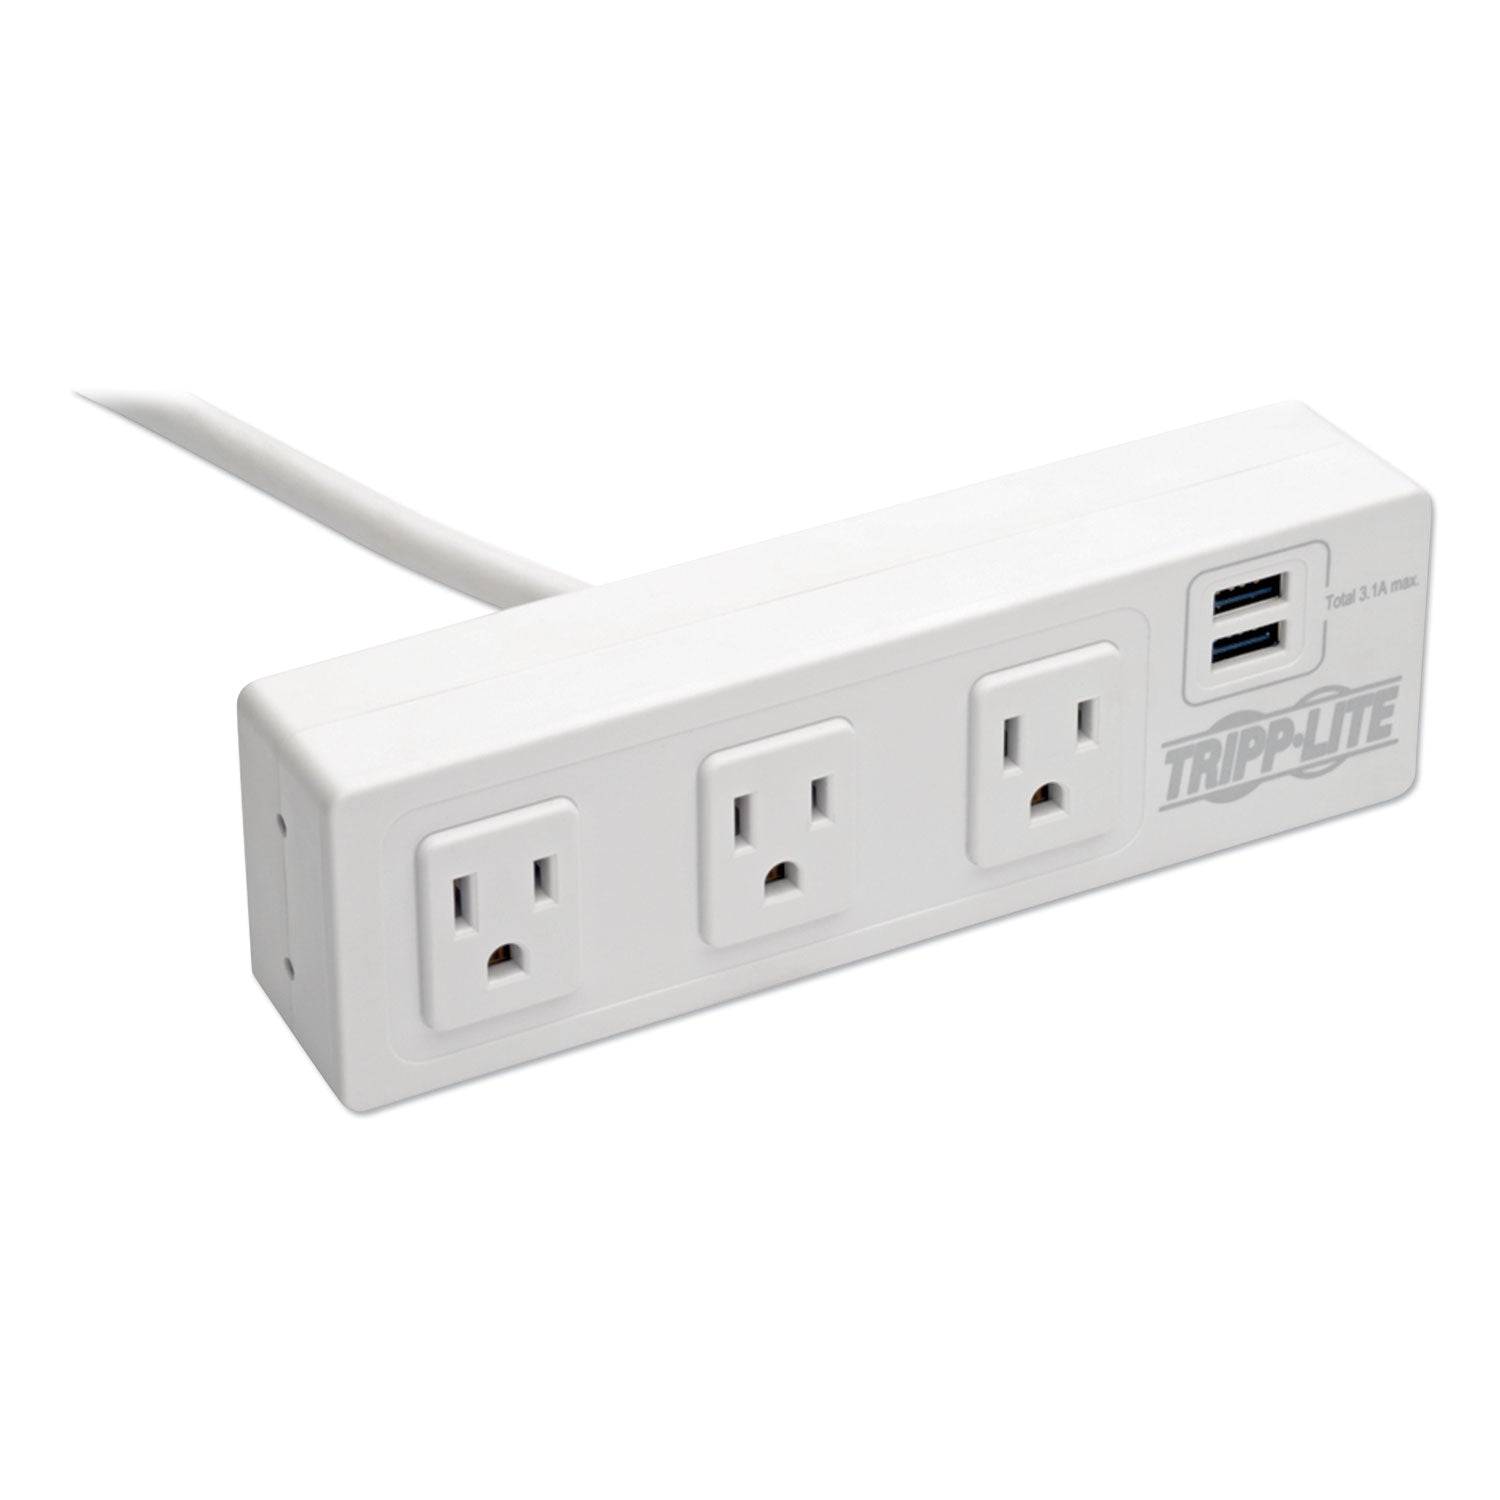 surge-protector-3-ac-outlets-2-usb-ports-10-ft-cord-510-j-white_trptlp310usbcw - 3